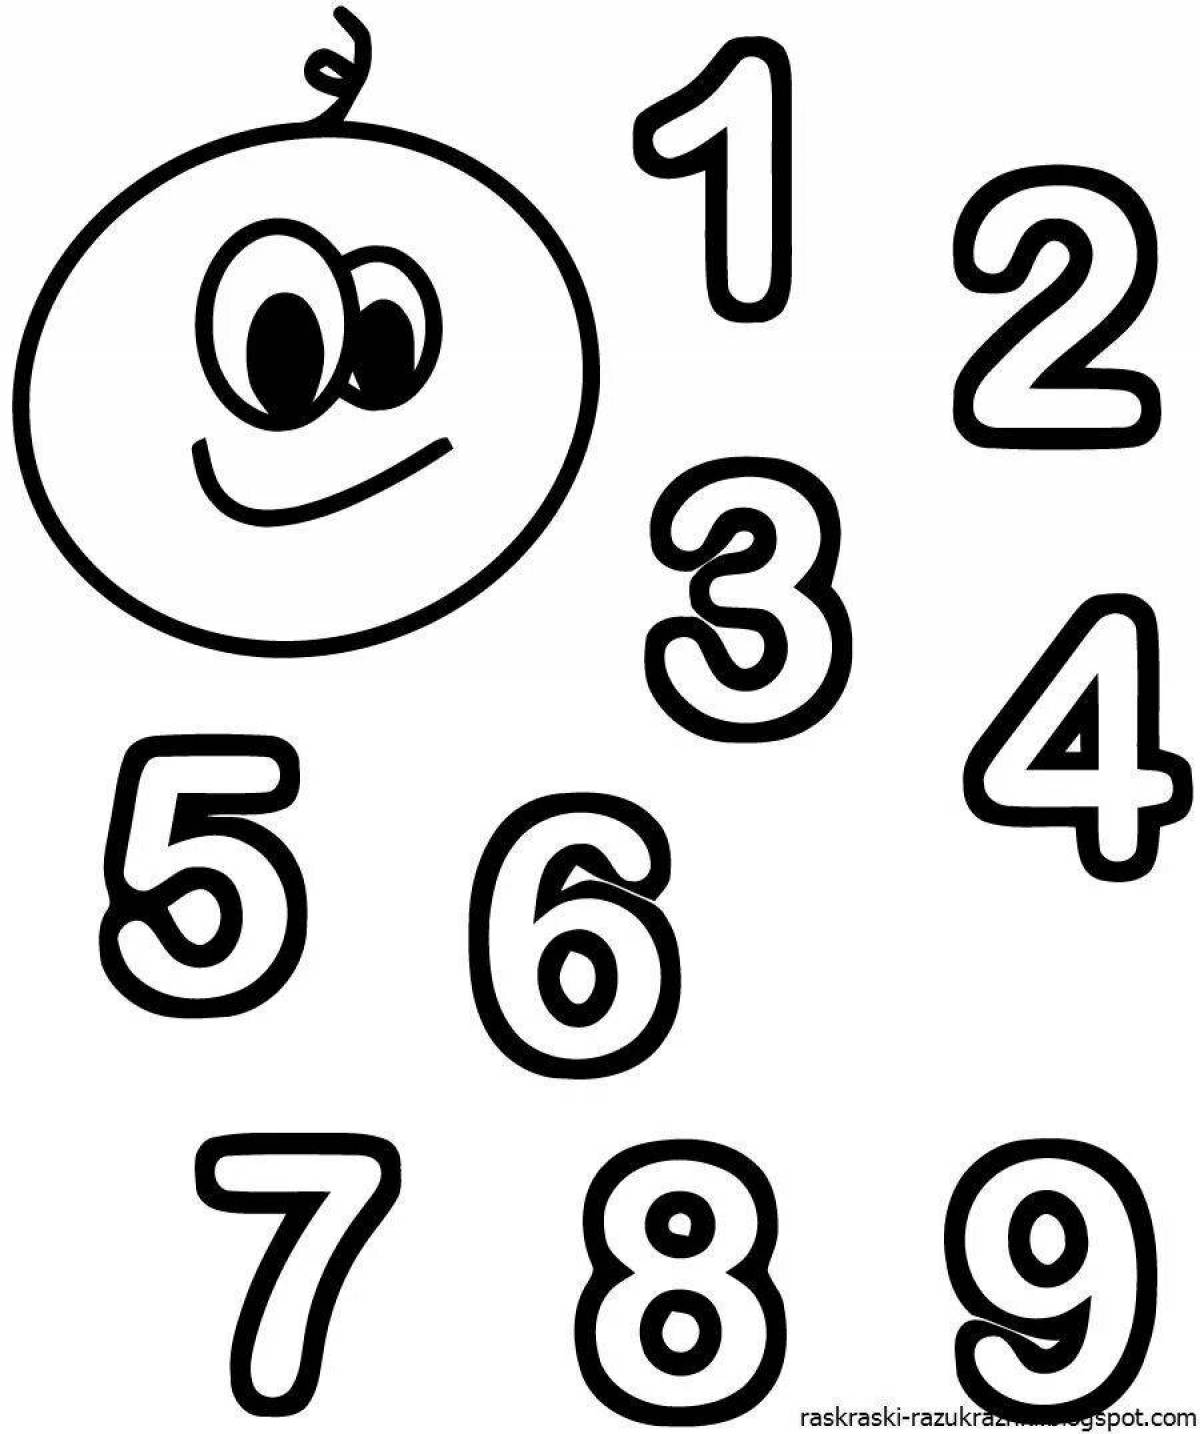 Coloring pages with numbers up to 20